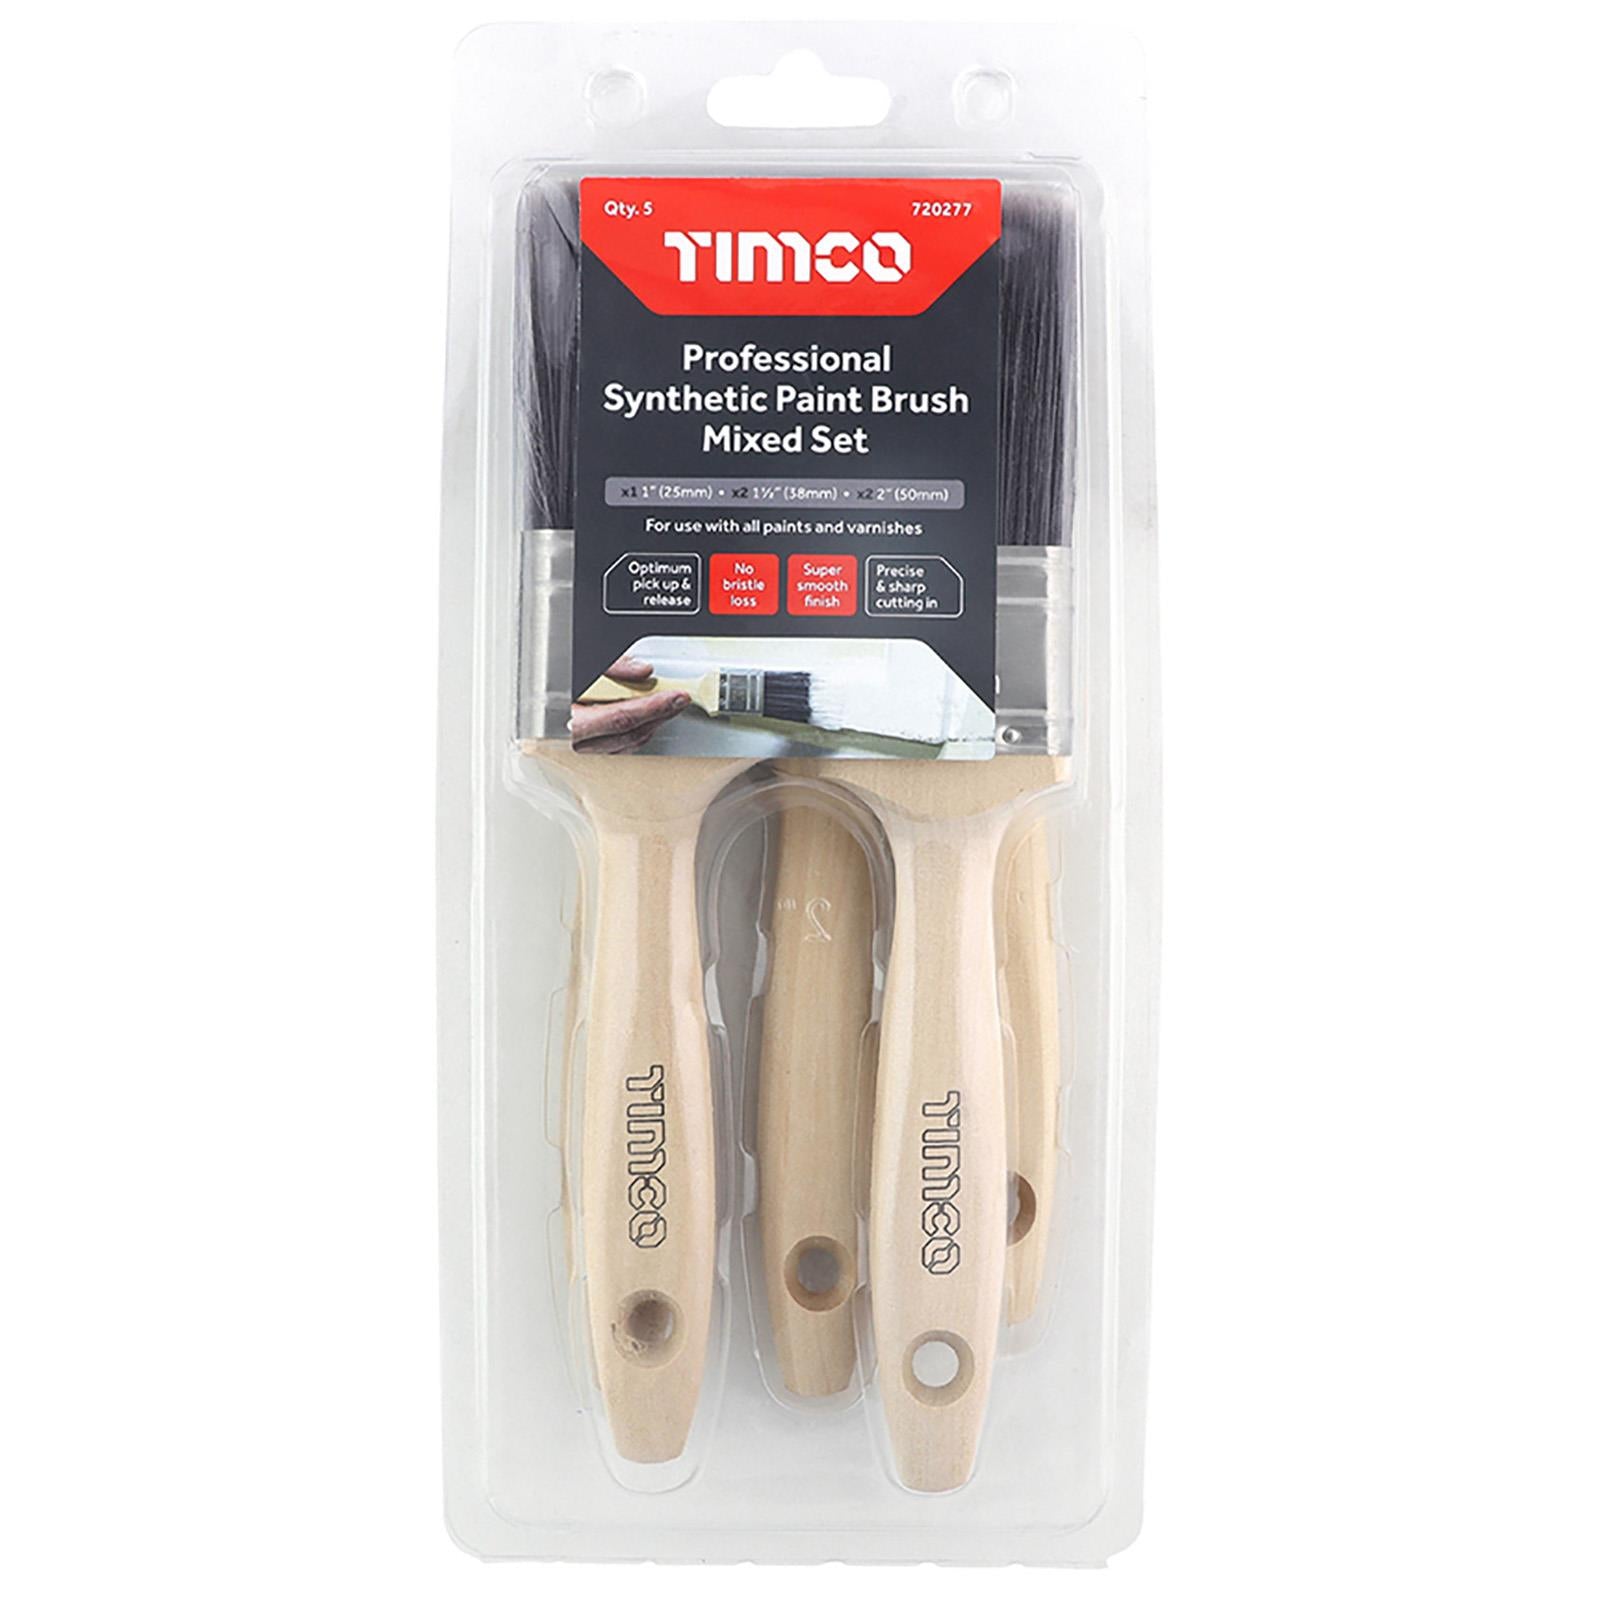 TIMCO Paint Brush Set Professional Synthetic 5 Pack 25mm 38mm 50mm No Bristle Loss